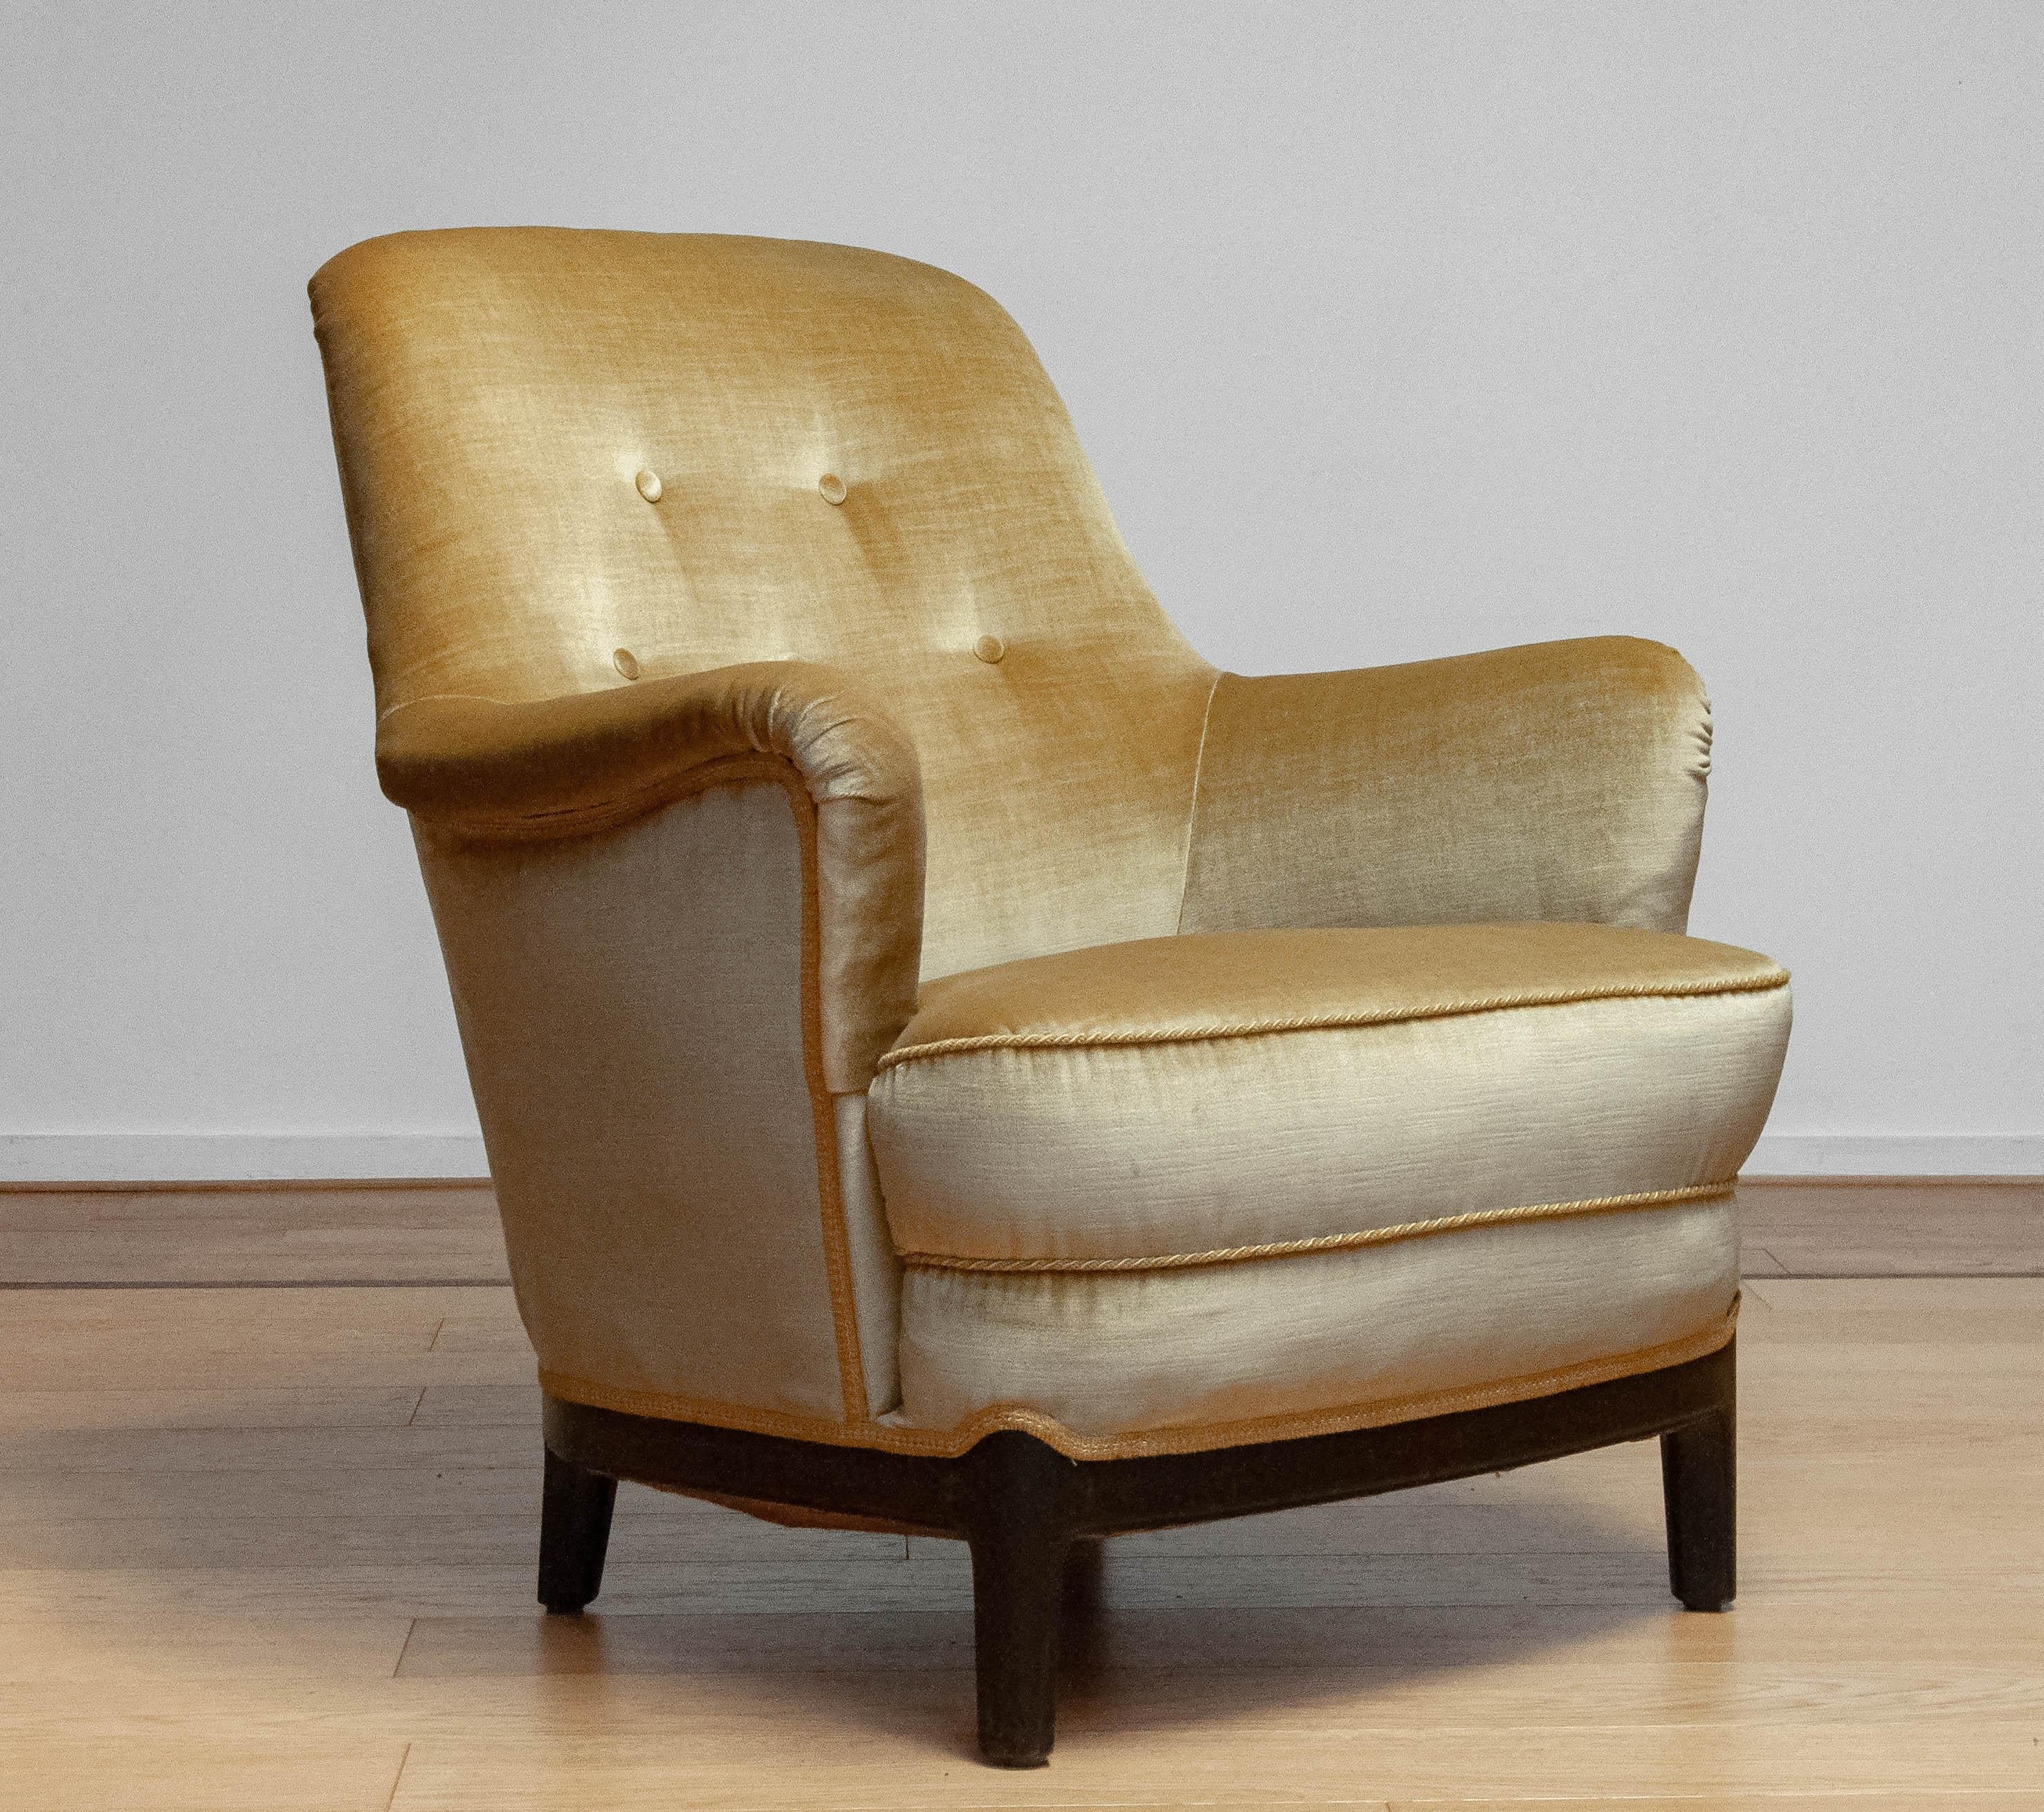 Very comfortable lounge chair designed by Carl Malmsten in the 1940s reupholstered with golden velvet fabric somewhere in the 1960s.
The oak legs are dark stained also in a later period. Assumably on the same moment when the chair has been